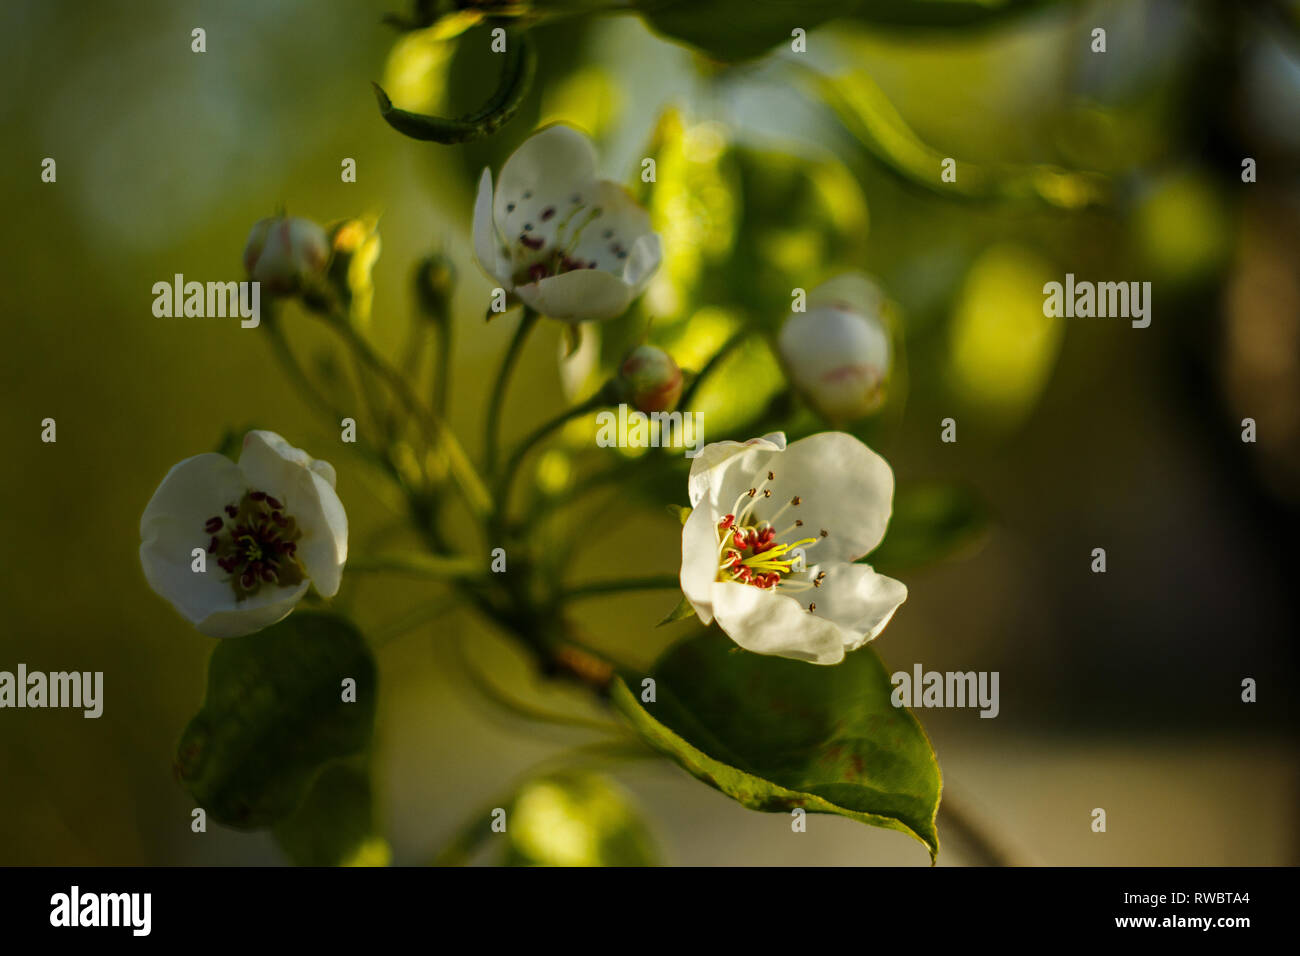 A pear flowers blossom on yellow green leaves background. A flowers at the sunny day Stock Photo